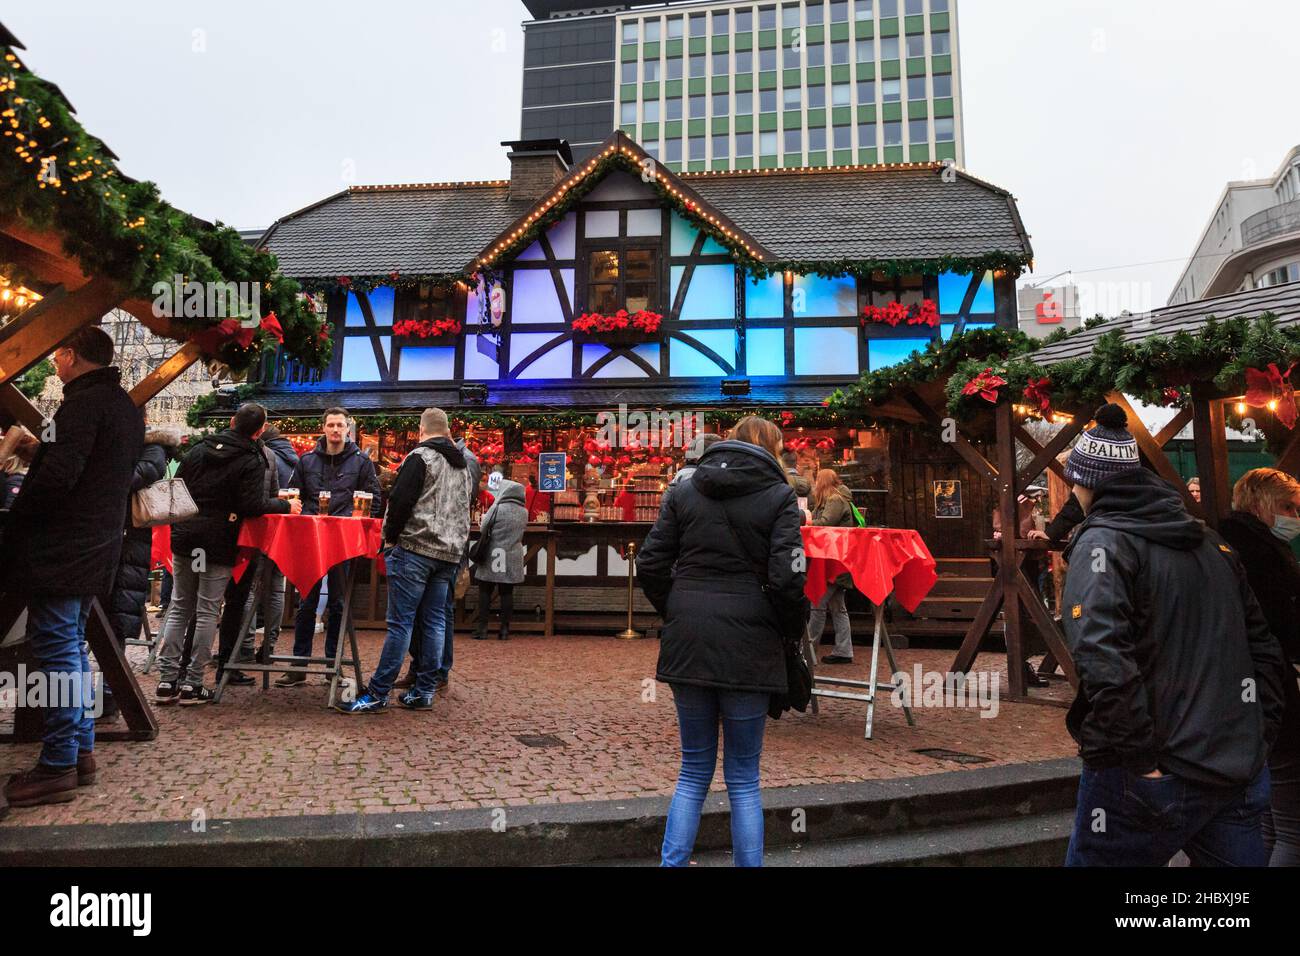 Mulled wine, food and drinks hut, typical German stall at Essen Christmas Market, NRW, Germany Stock Photo